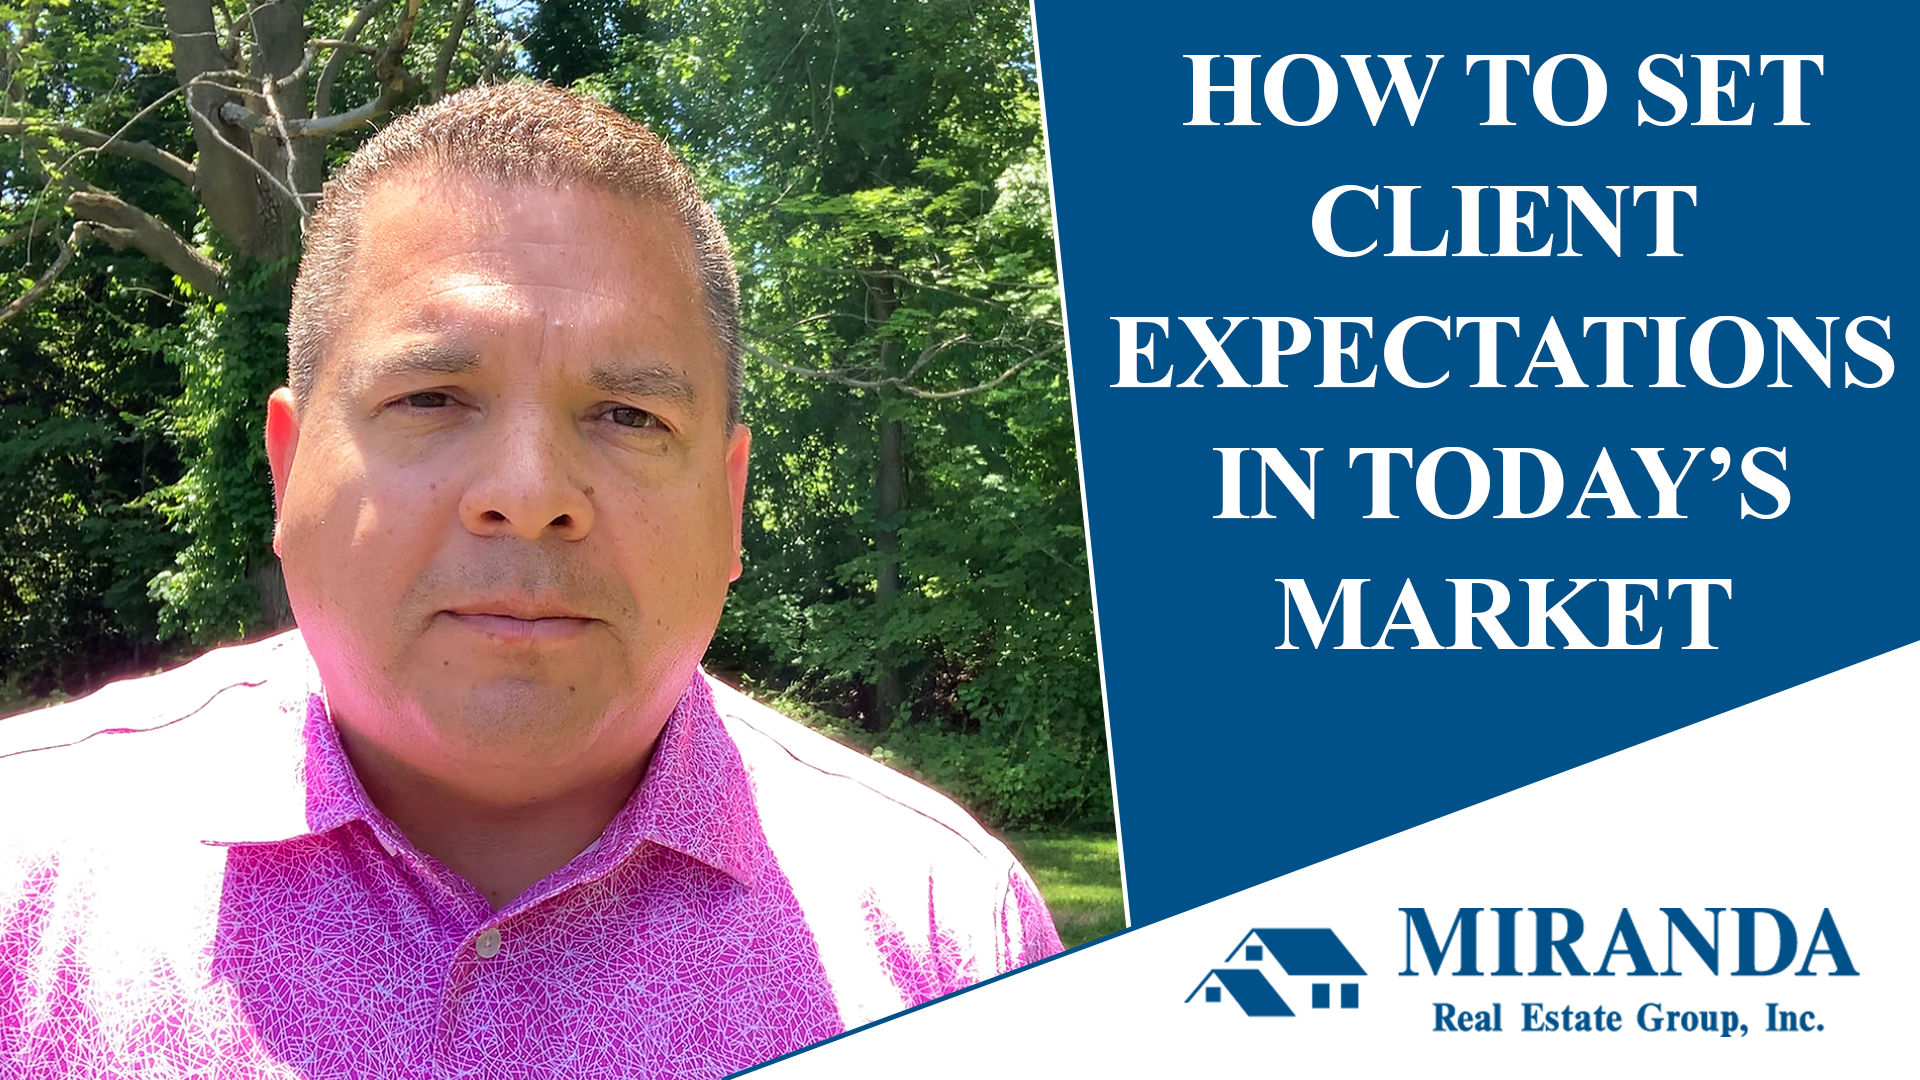 How to Set Expectations for Your Clients in Today’s Market